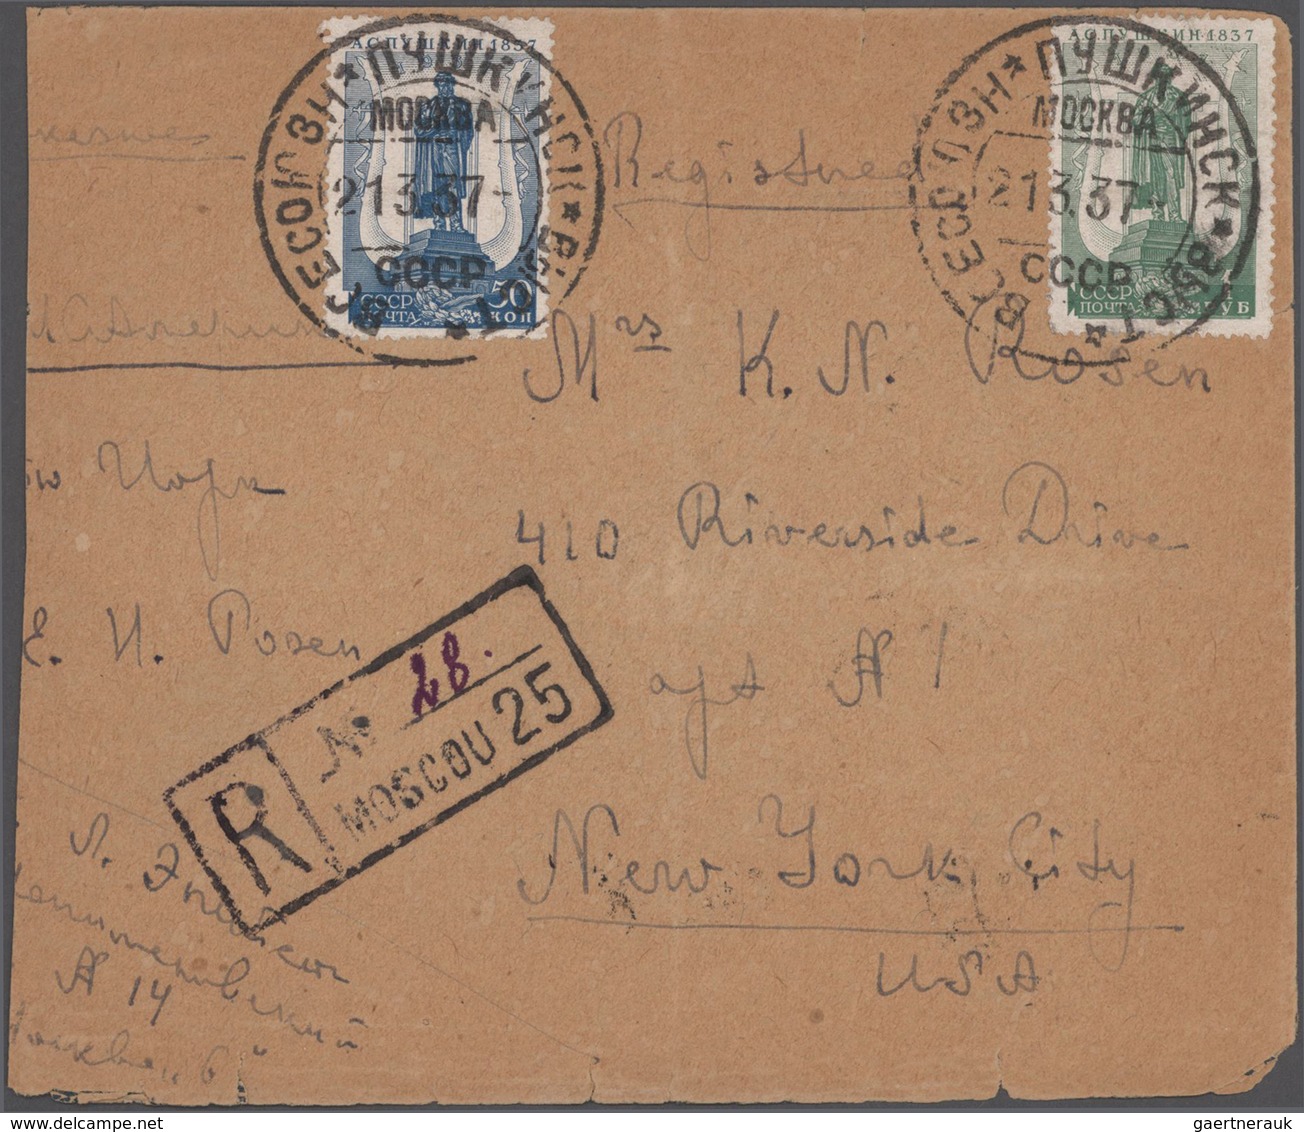 Sowjetunion: 1909/62 album with ca. 75 letters, picture-postcards and used postal stationery (some p